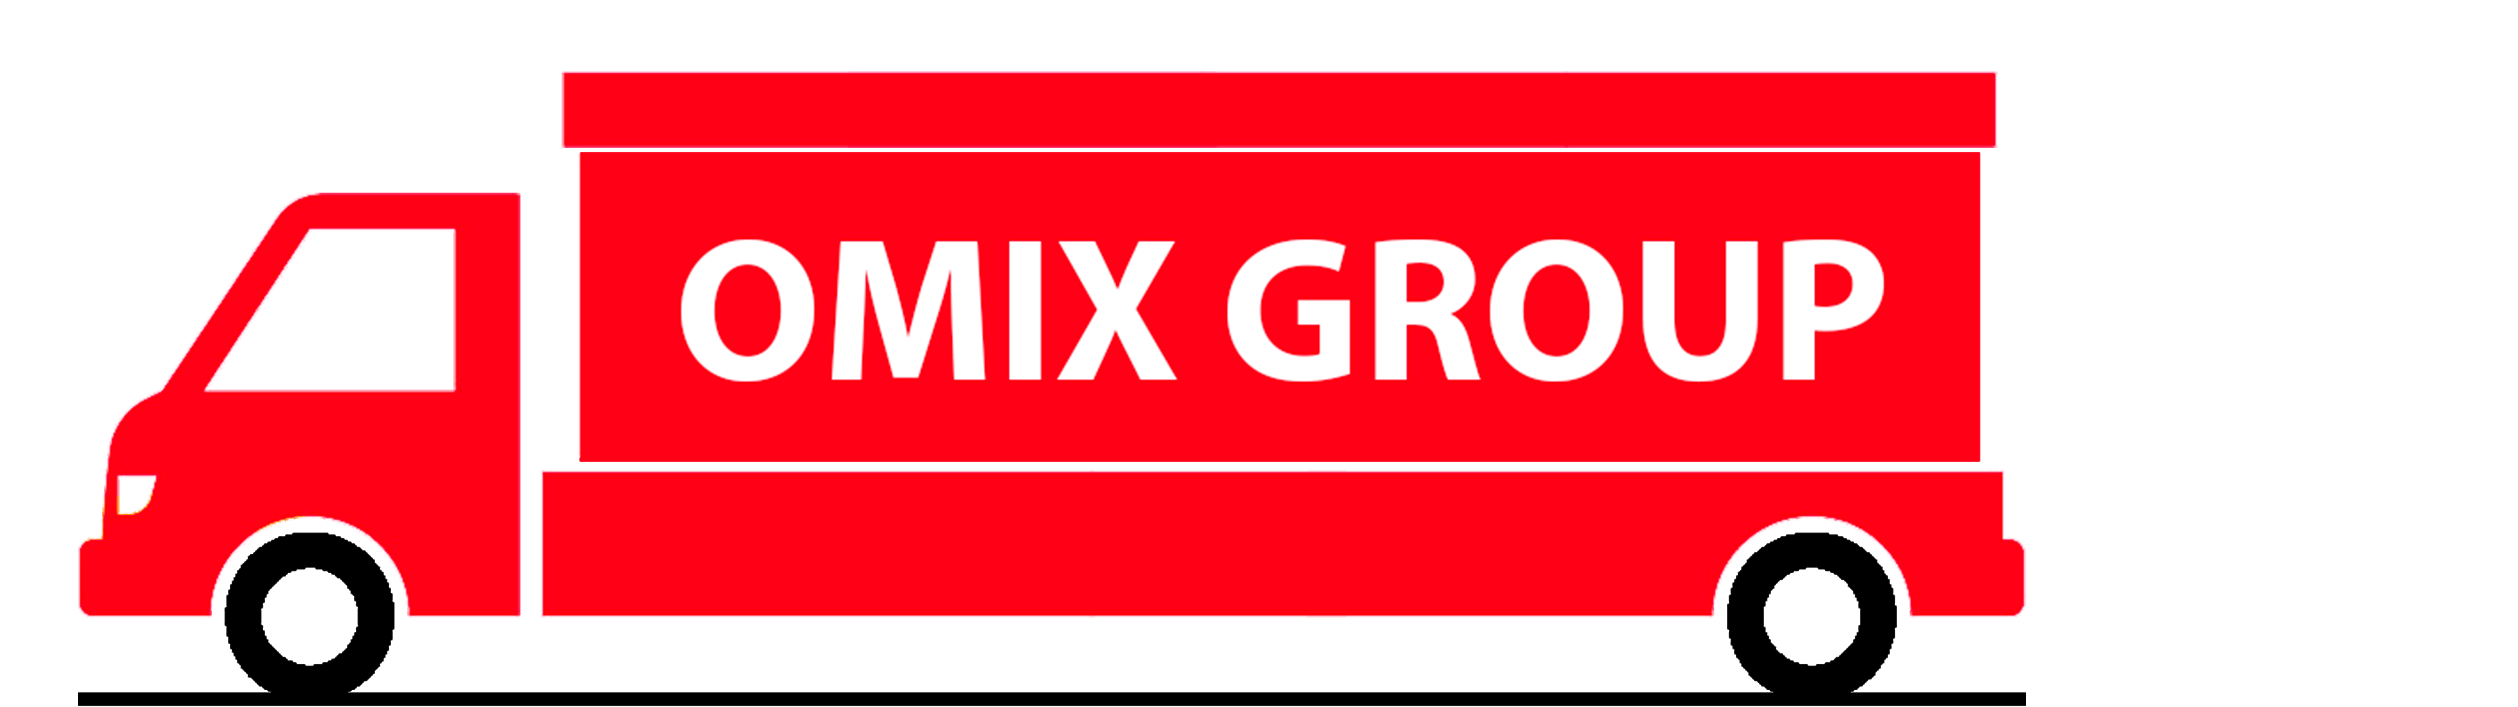 omix.group